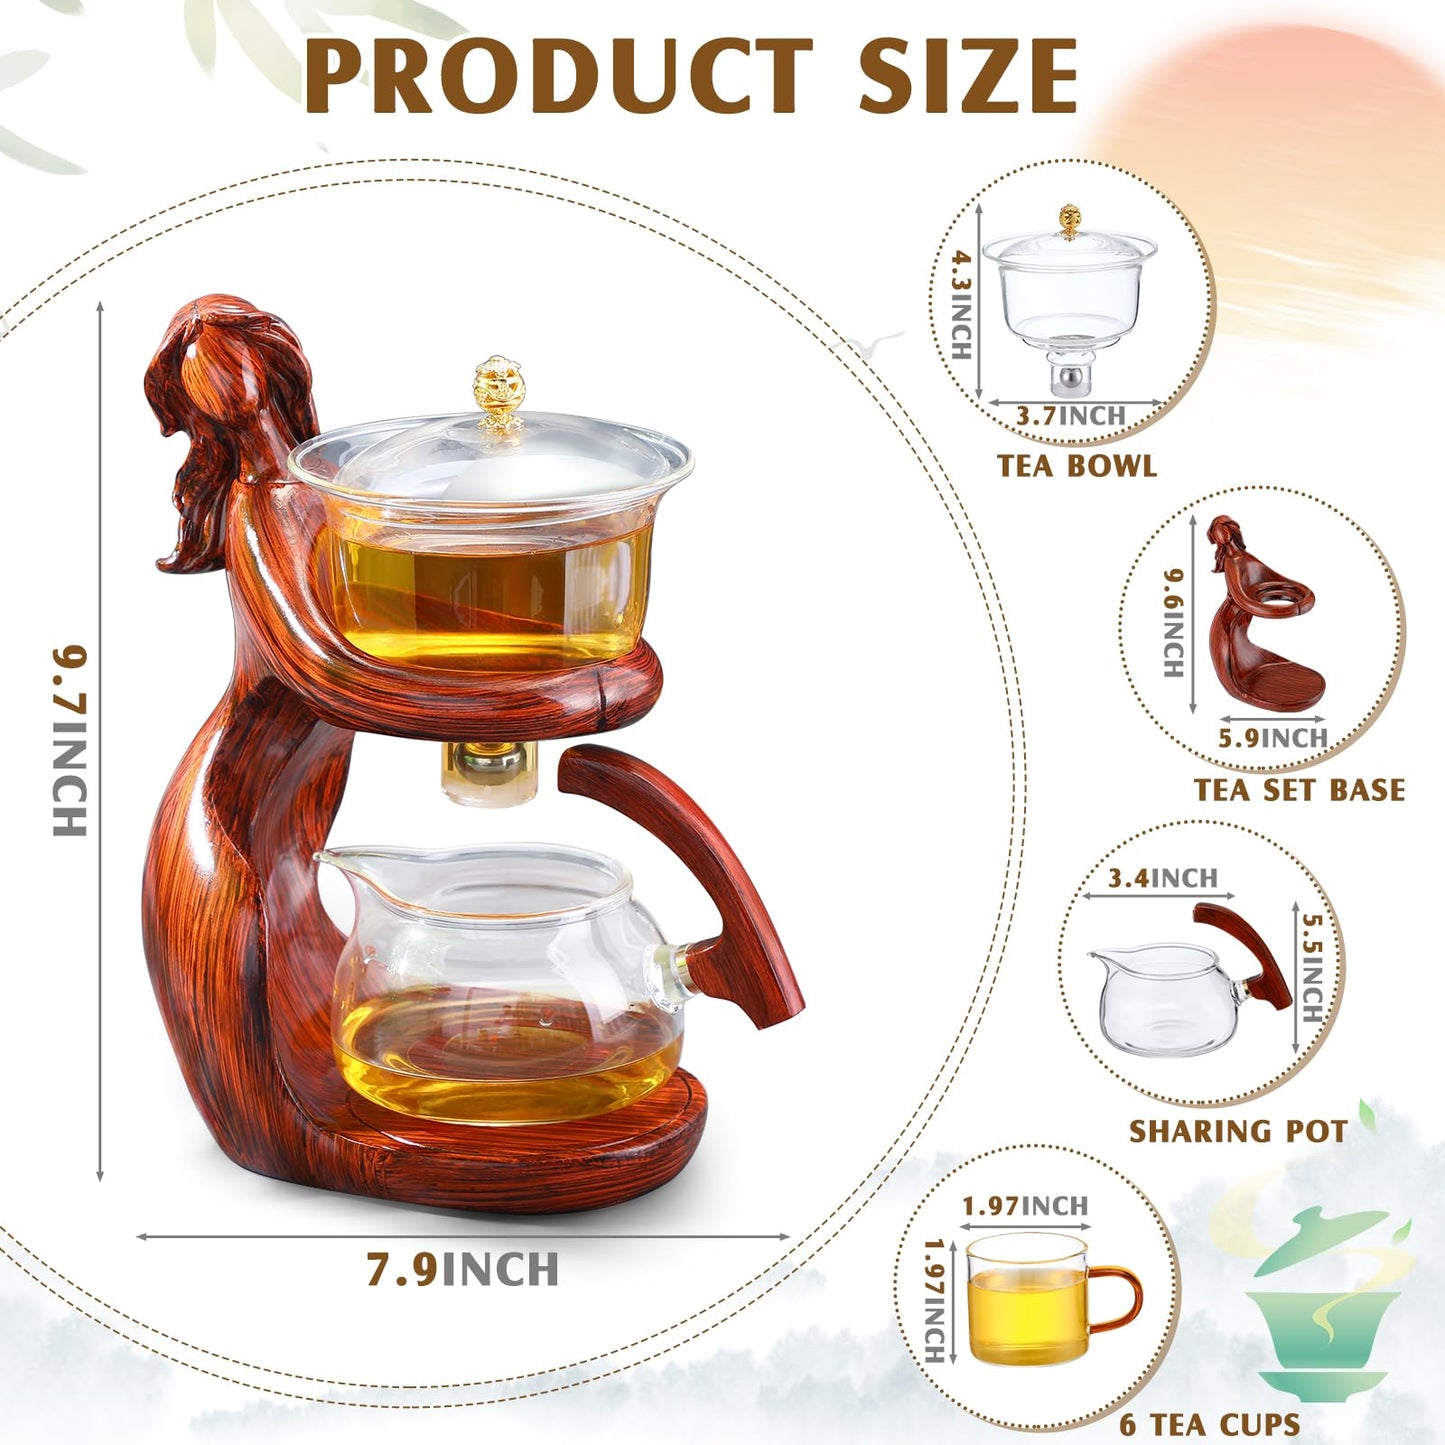 Semi Automatic Glass Teapot Set Tea Maker with Infuser Lazy Magnetic Semi Automatic Kungfu Tea Set with 6 Small Cups